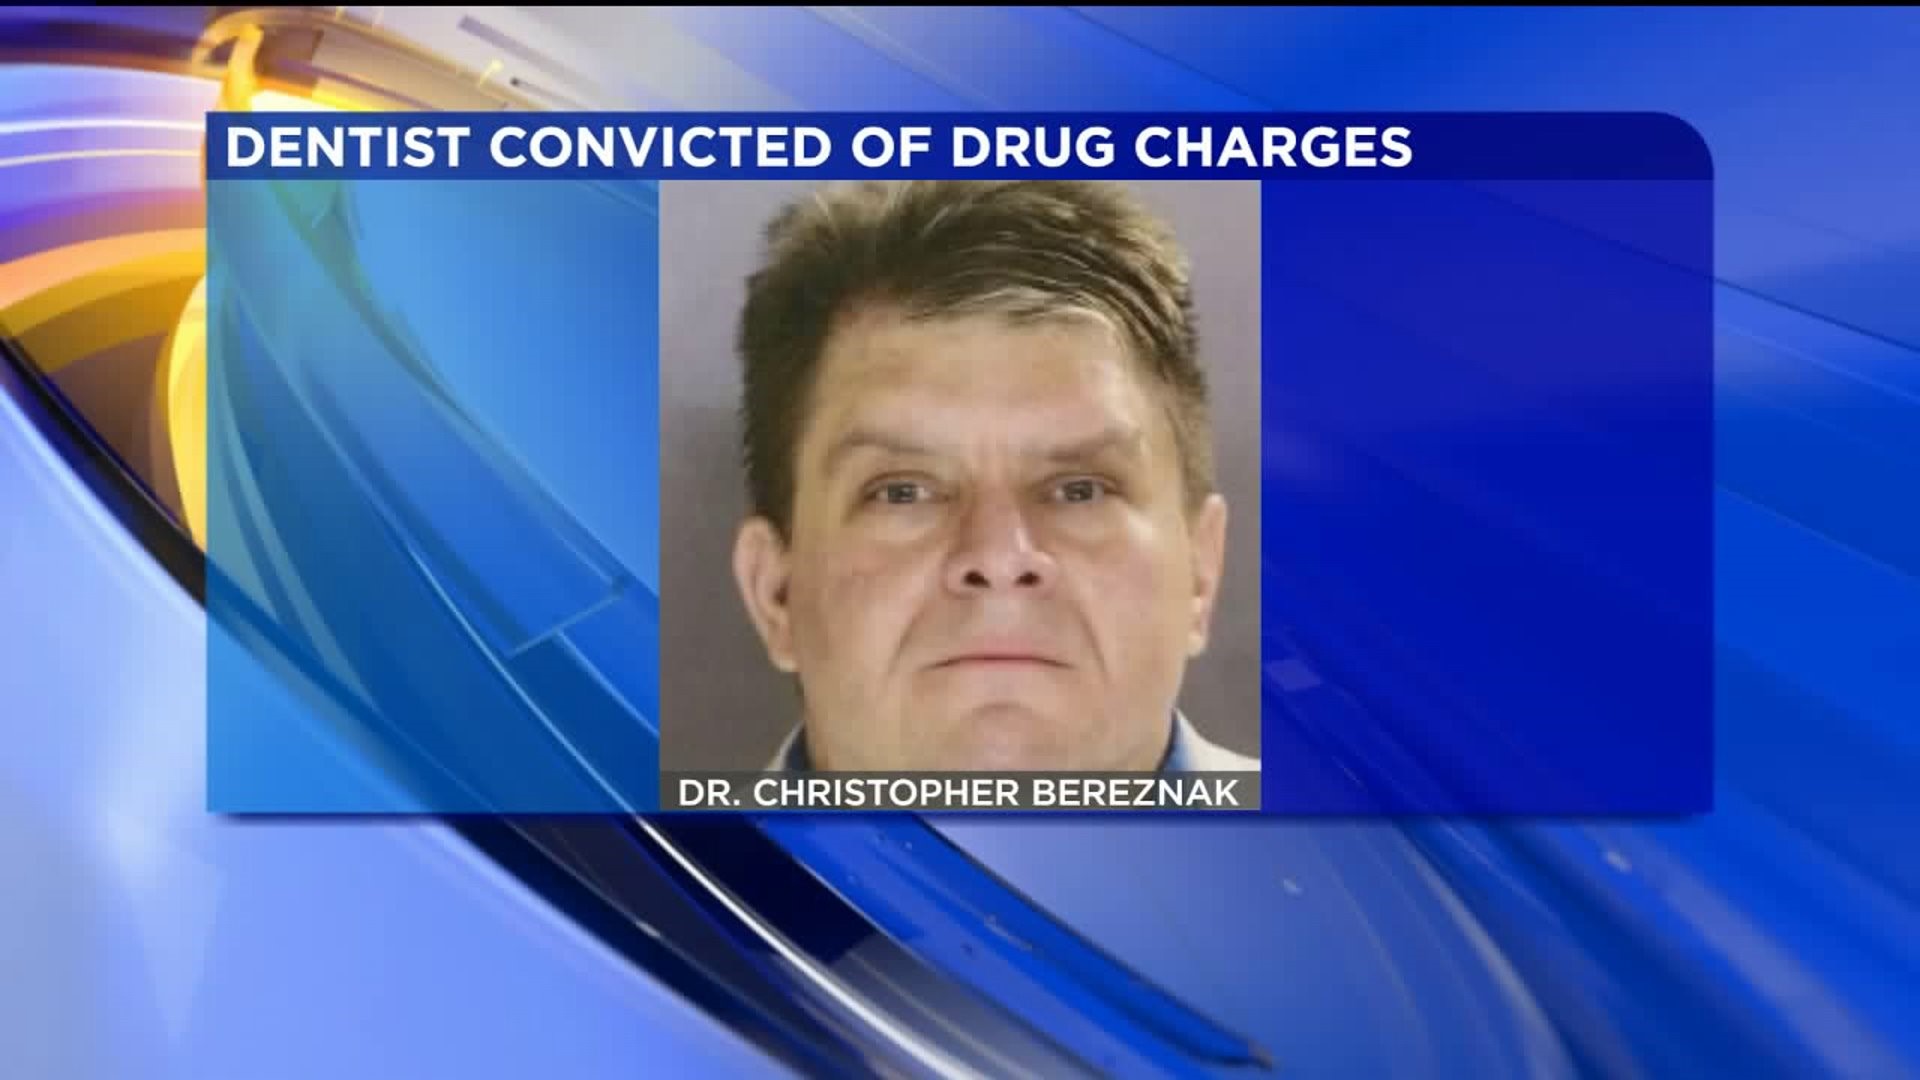 Dentist Convicted of Drug Charges